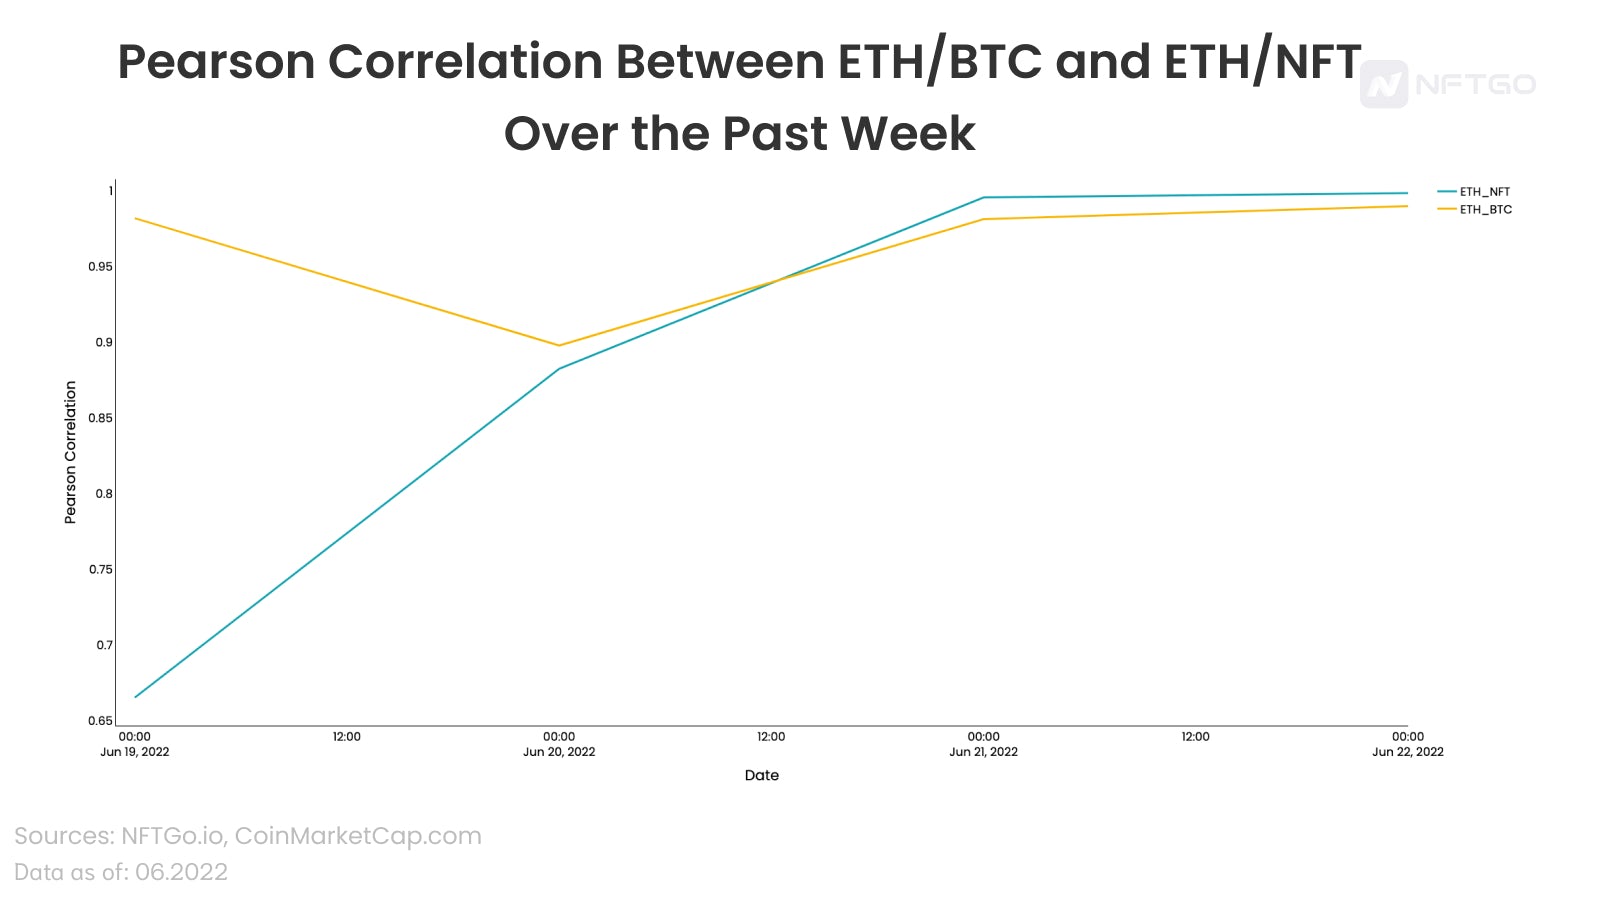 Pearson Correlation of ETH/BTC and ETH/NFT Over the Past Week 